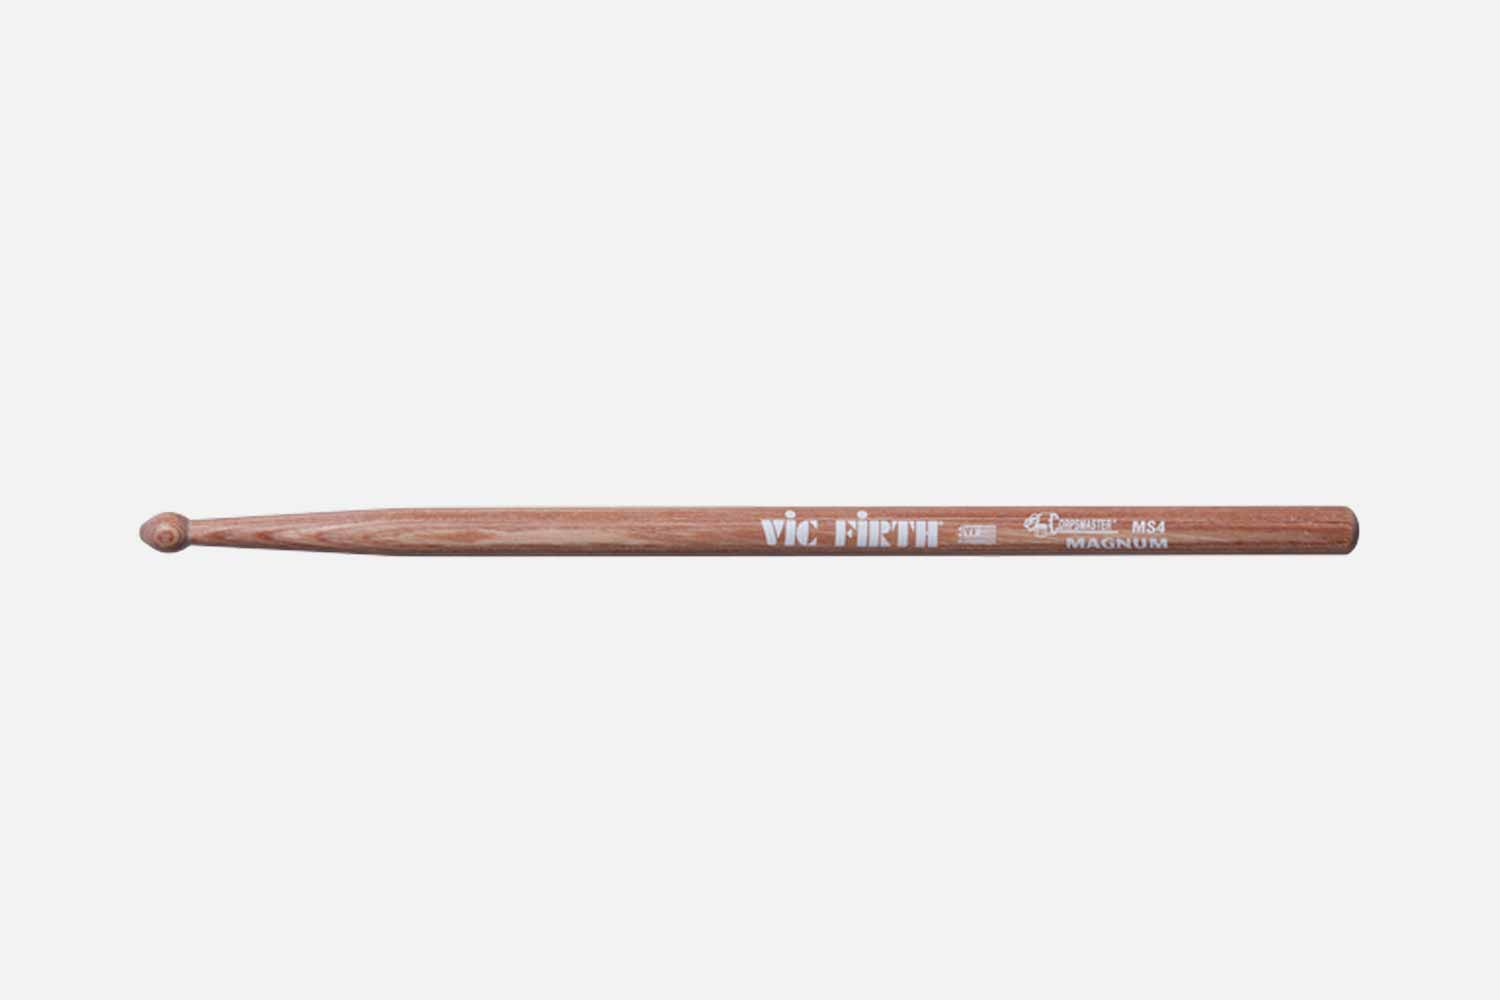 Vic firth MS4 Corpsmaster (5461272330404)